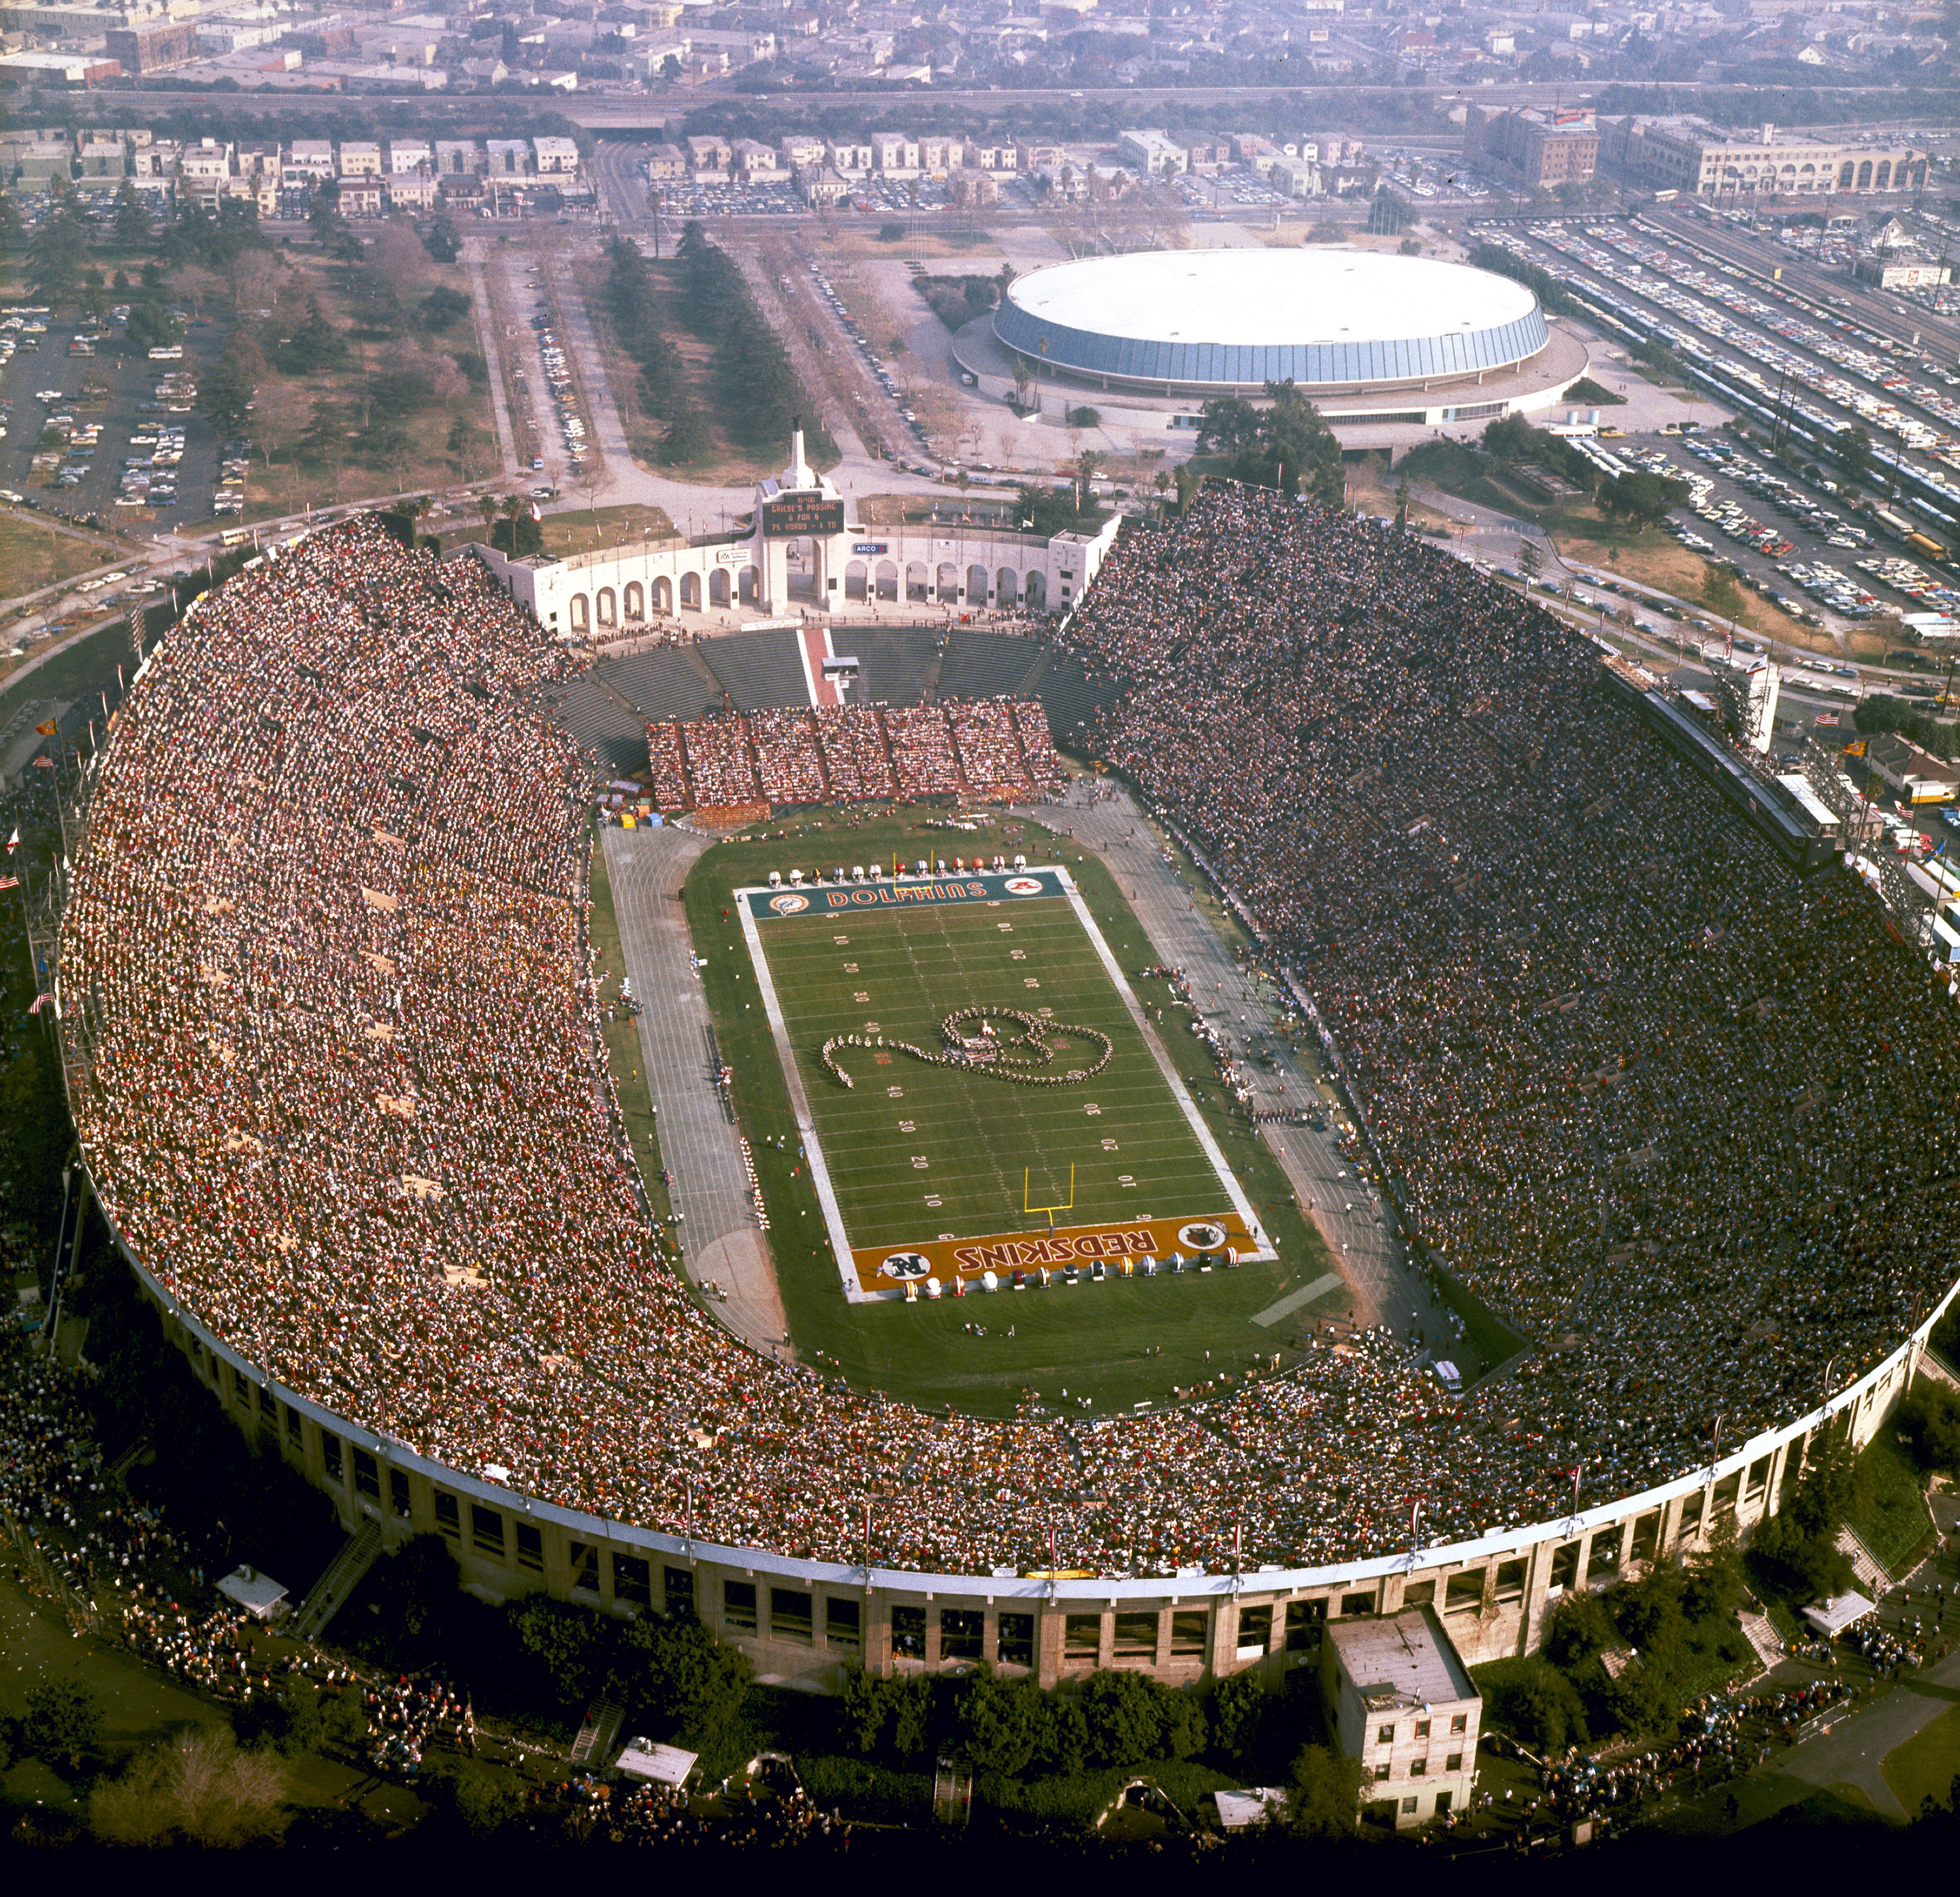 Super Bowl Stadiums: From I to 50